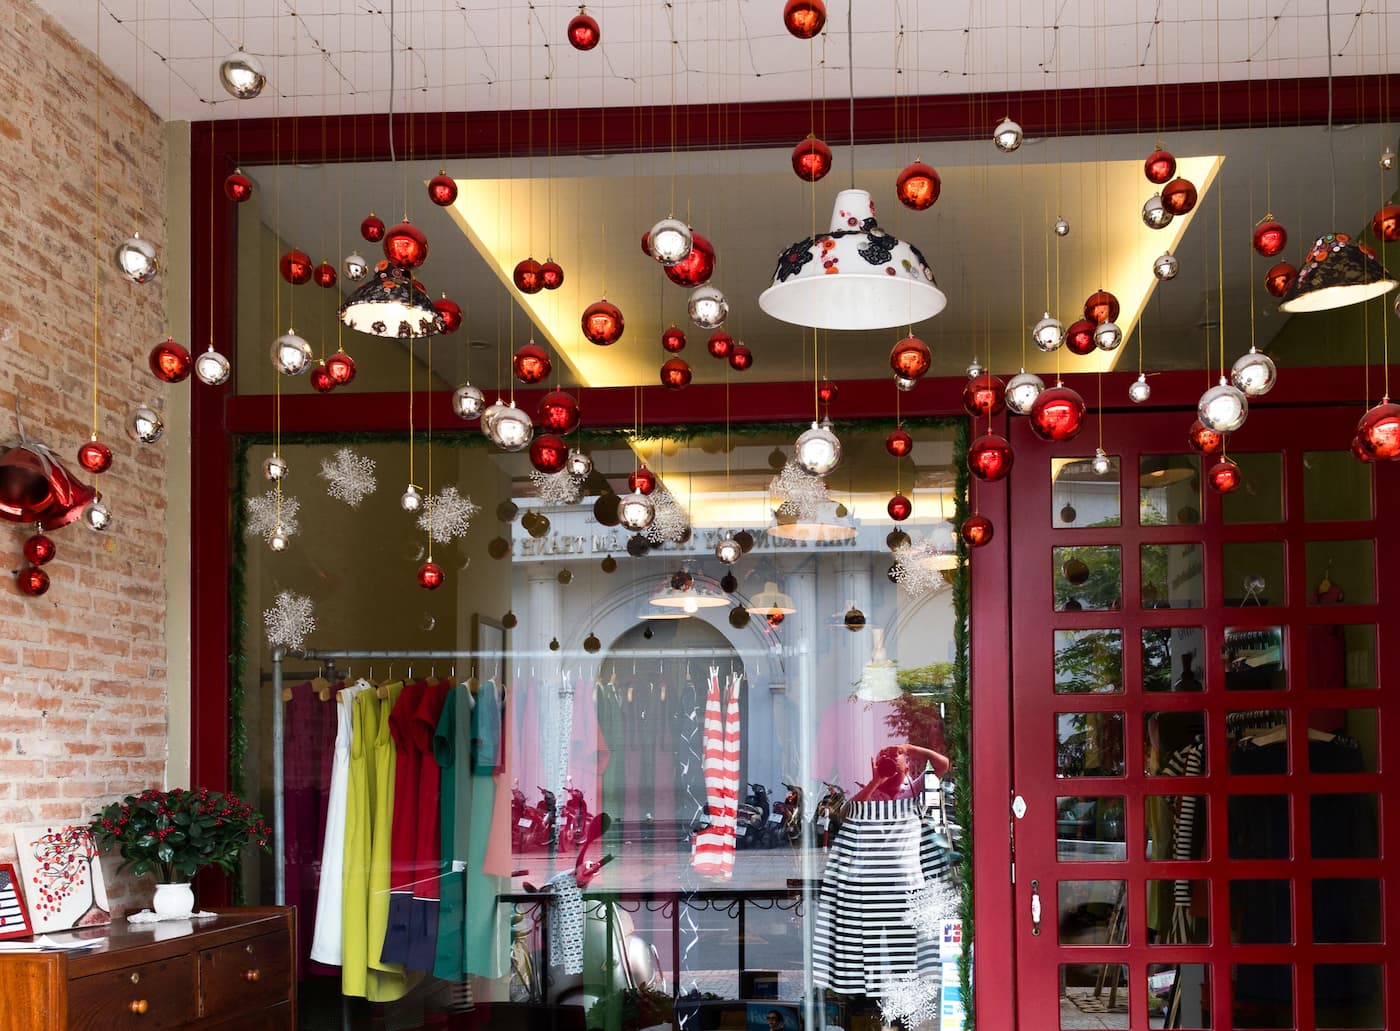 Storefront exterior decorated for the holidays